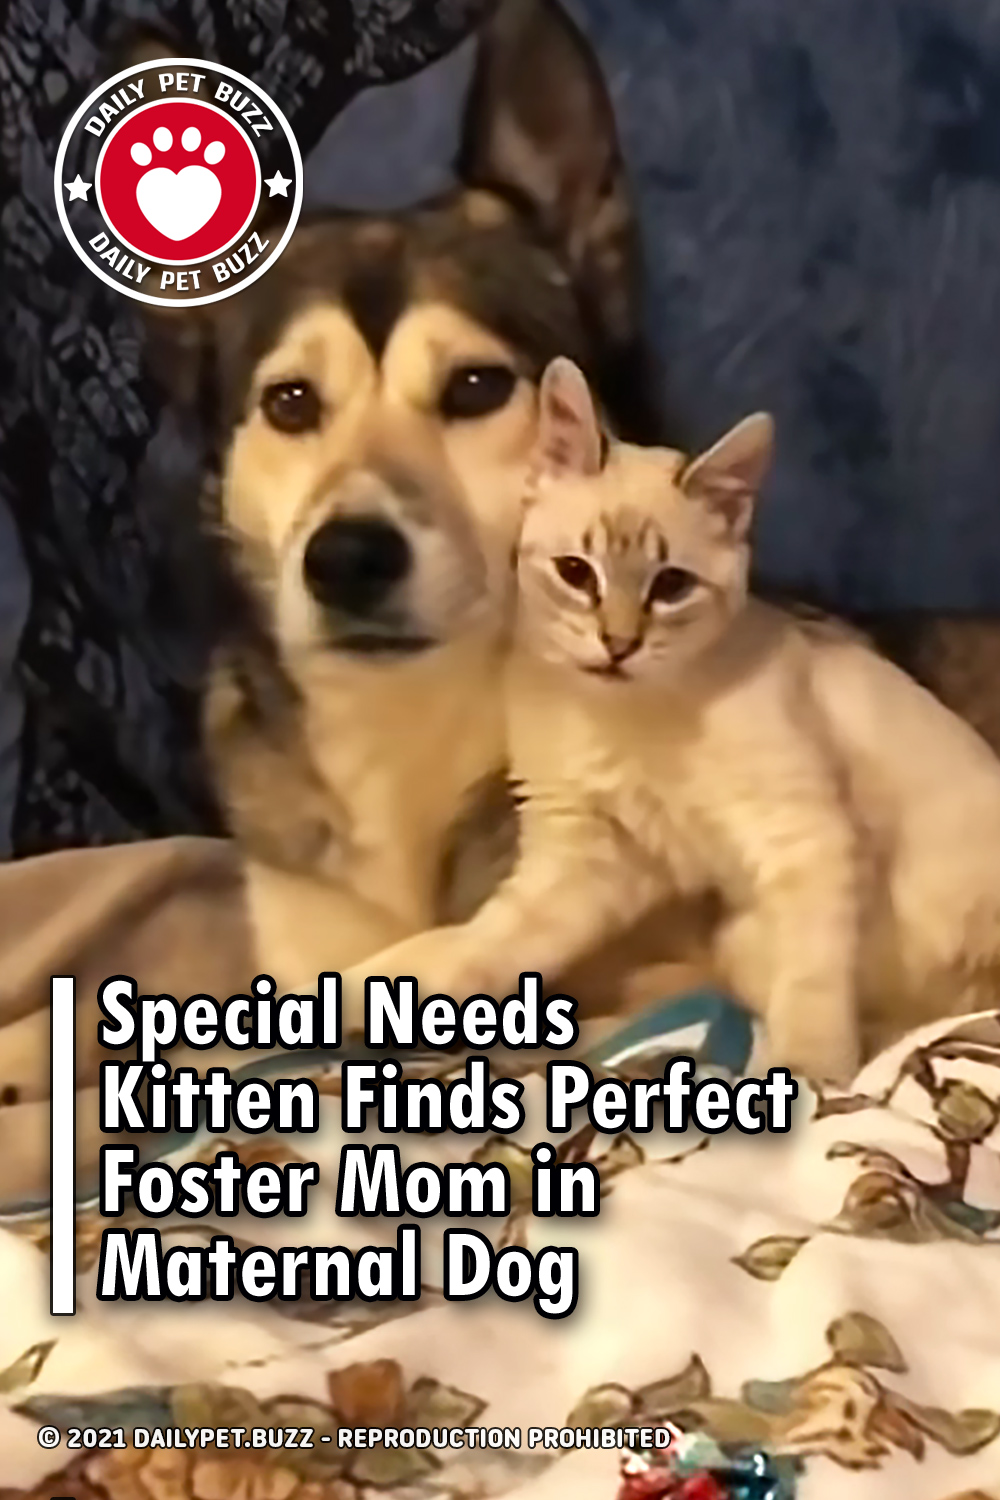 Special Needs Kitten Finds Perfect Foster Mom in Maternal Dog